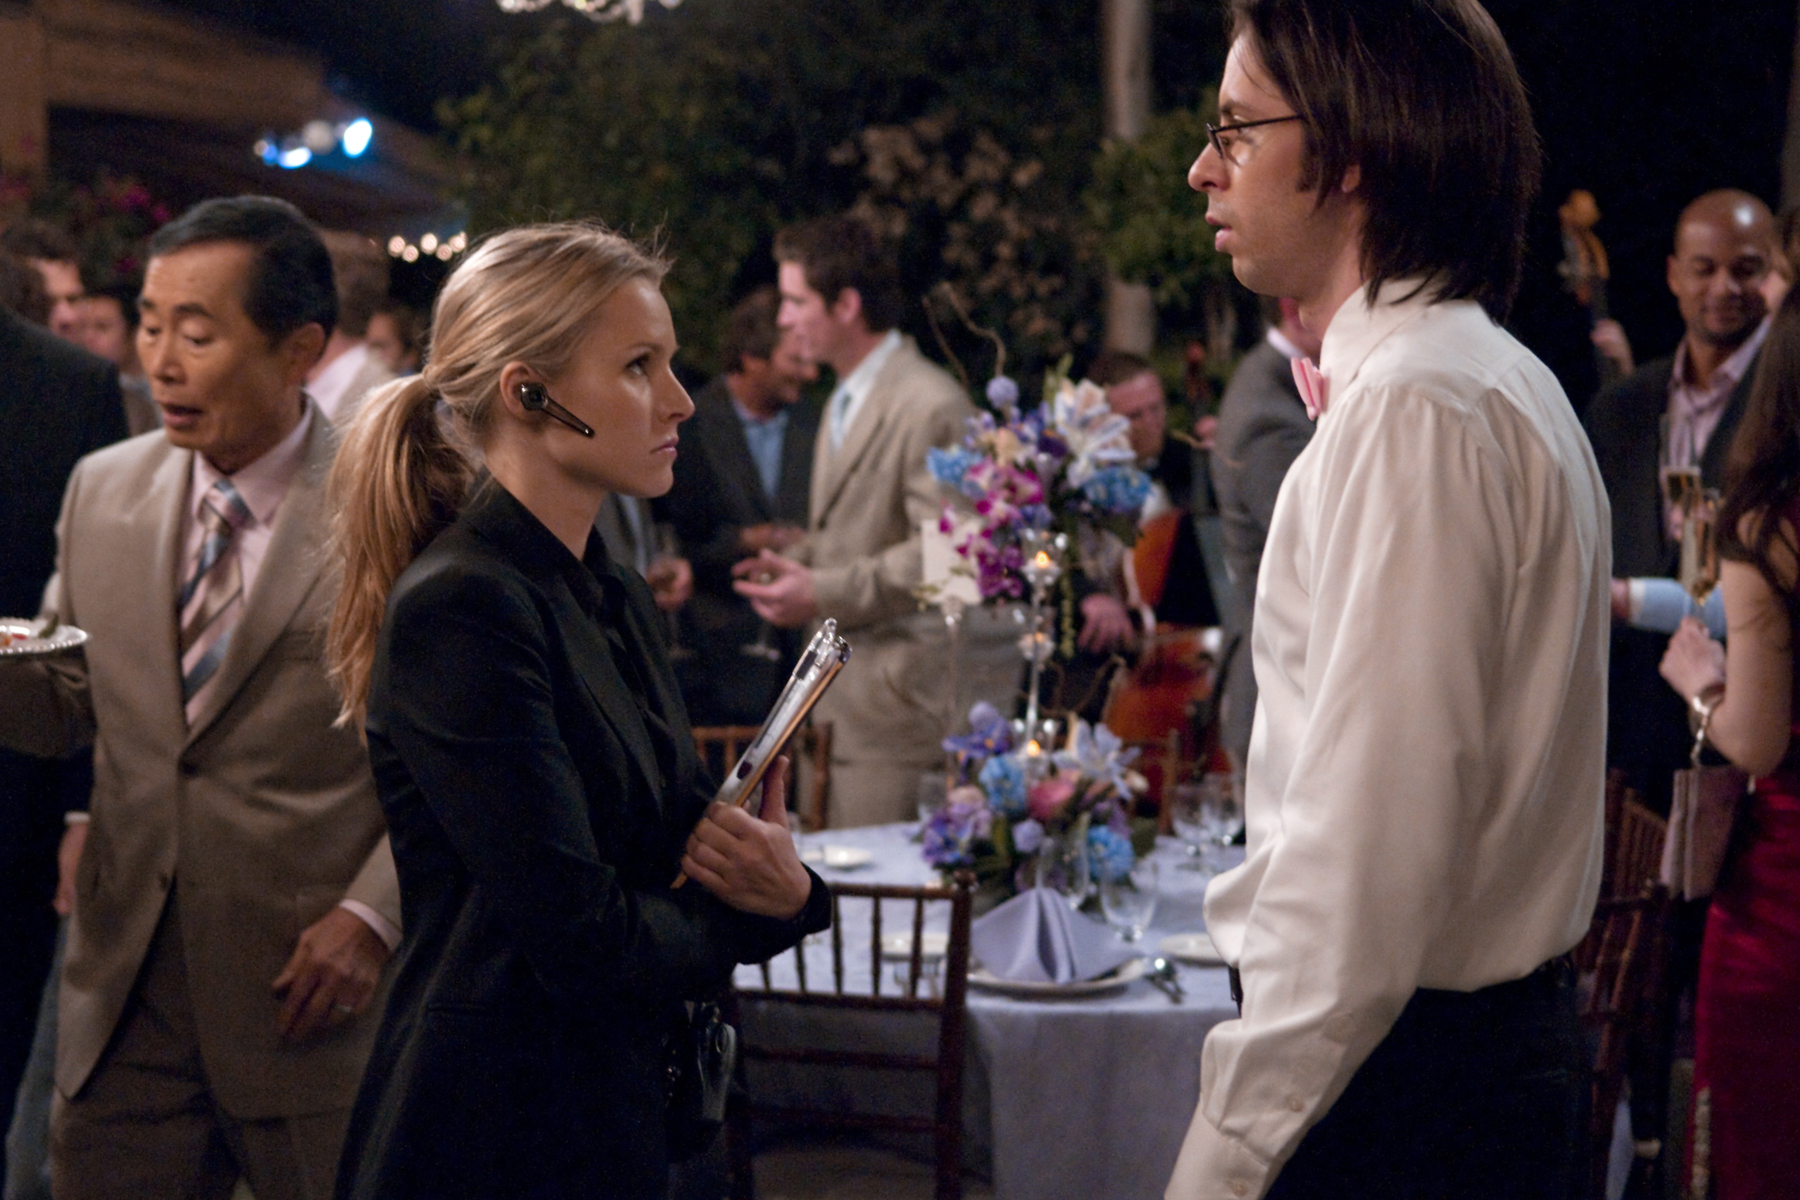 Still of Martin Starr in Party Down (2009)